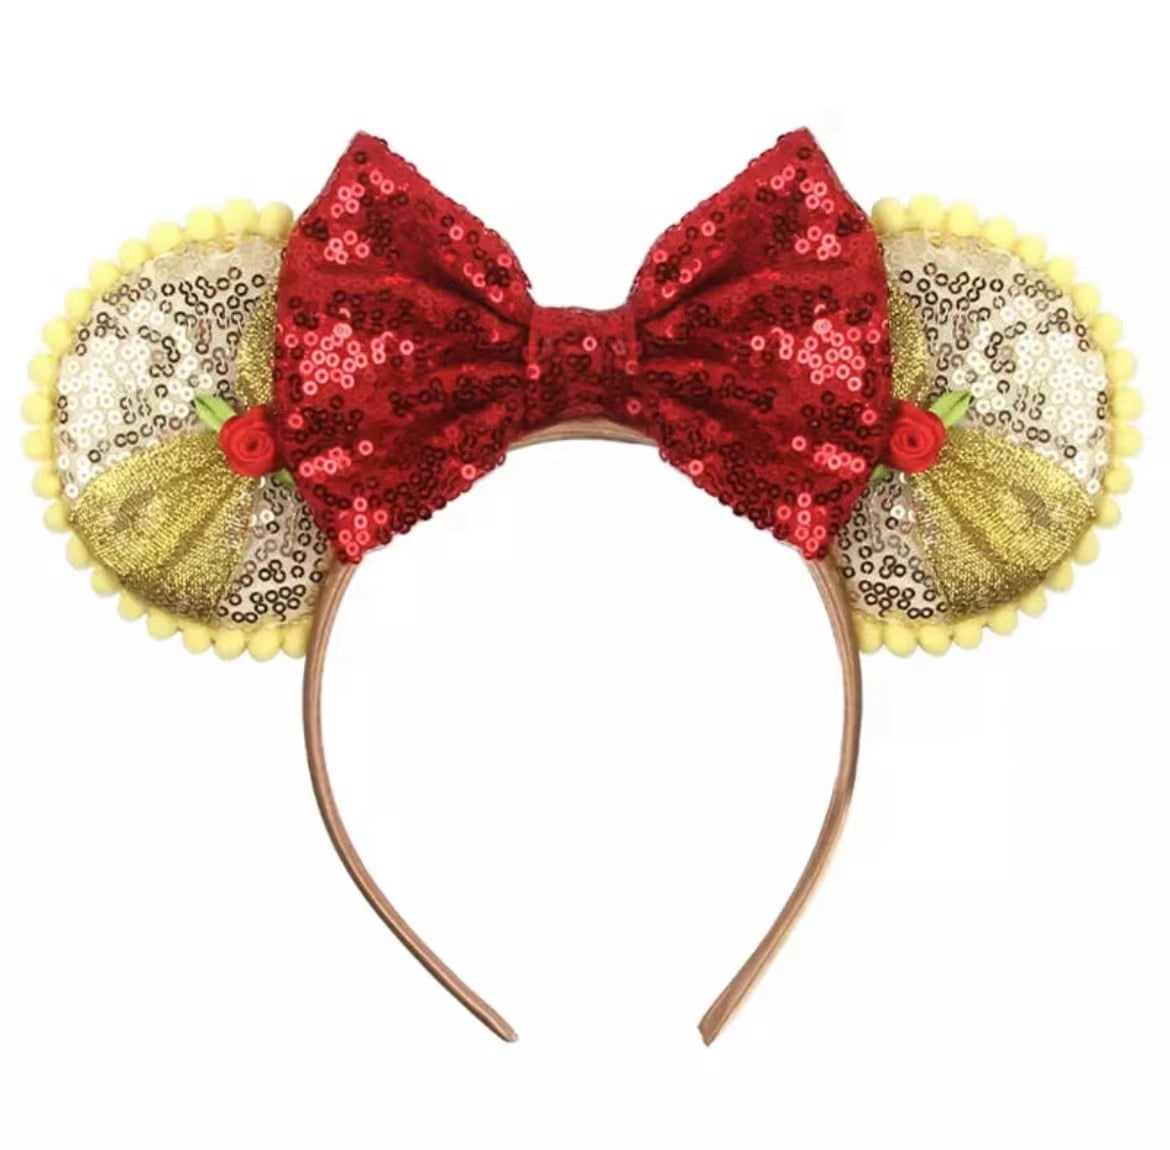 Beauty and the Beast Inspired Mouse Ears